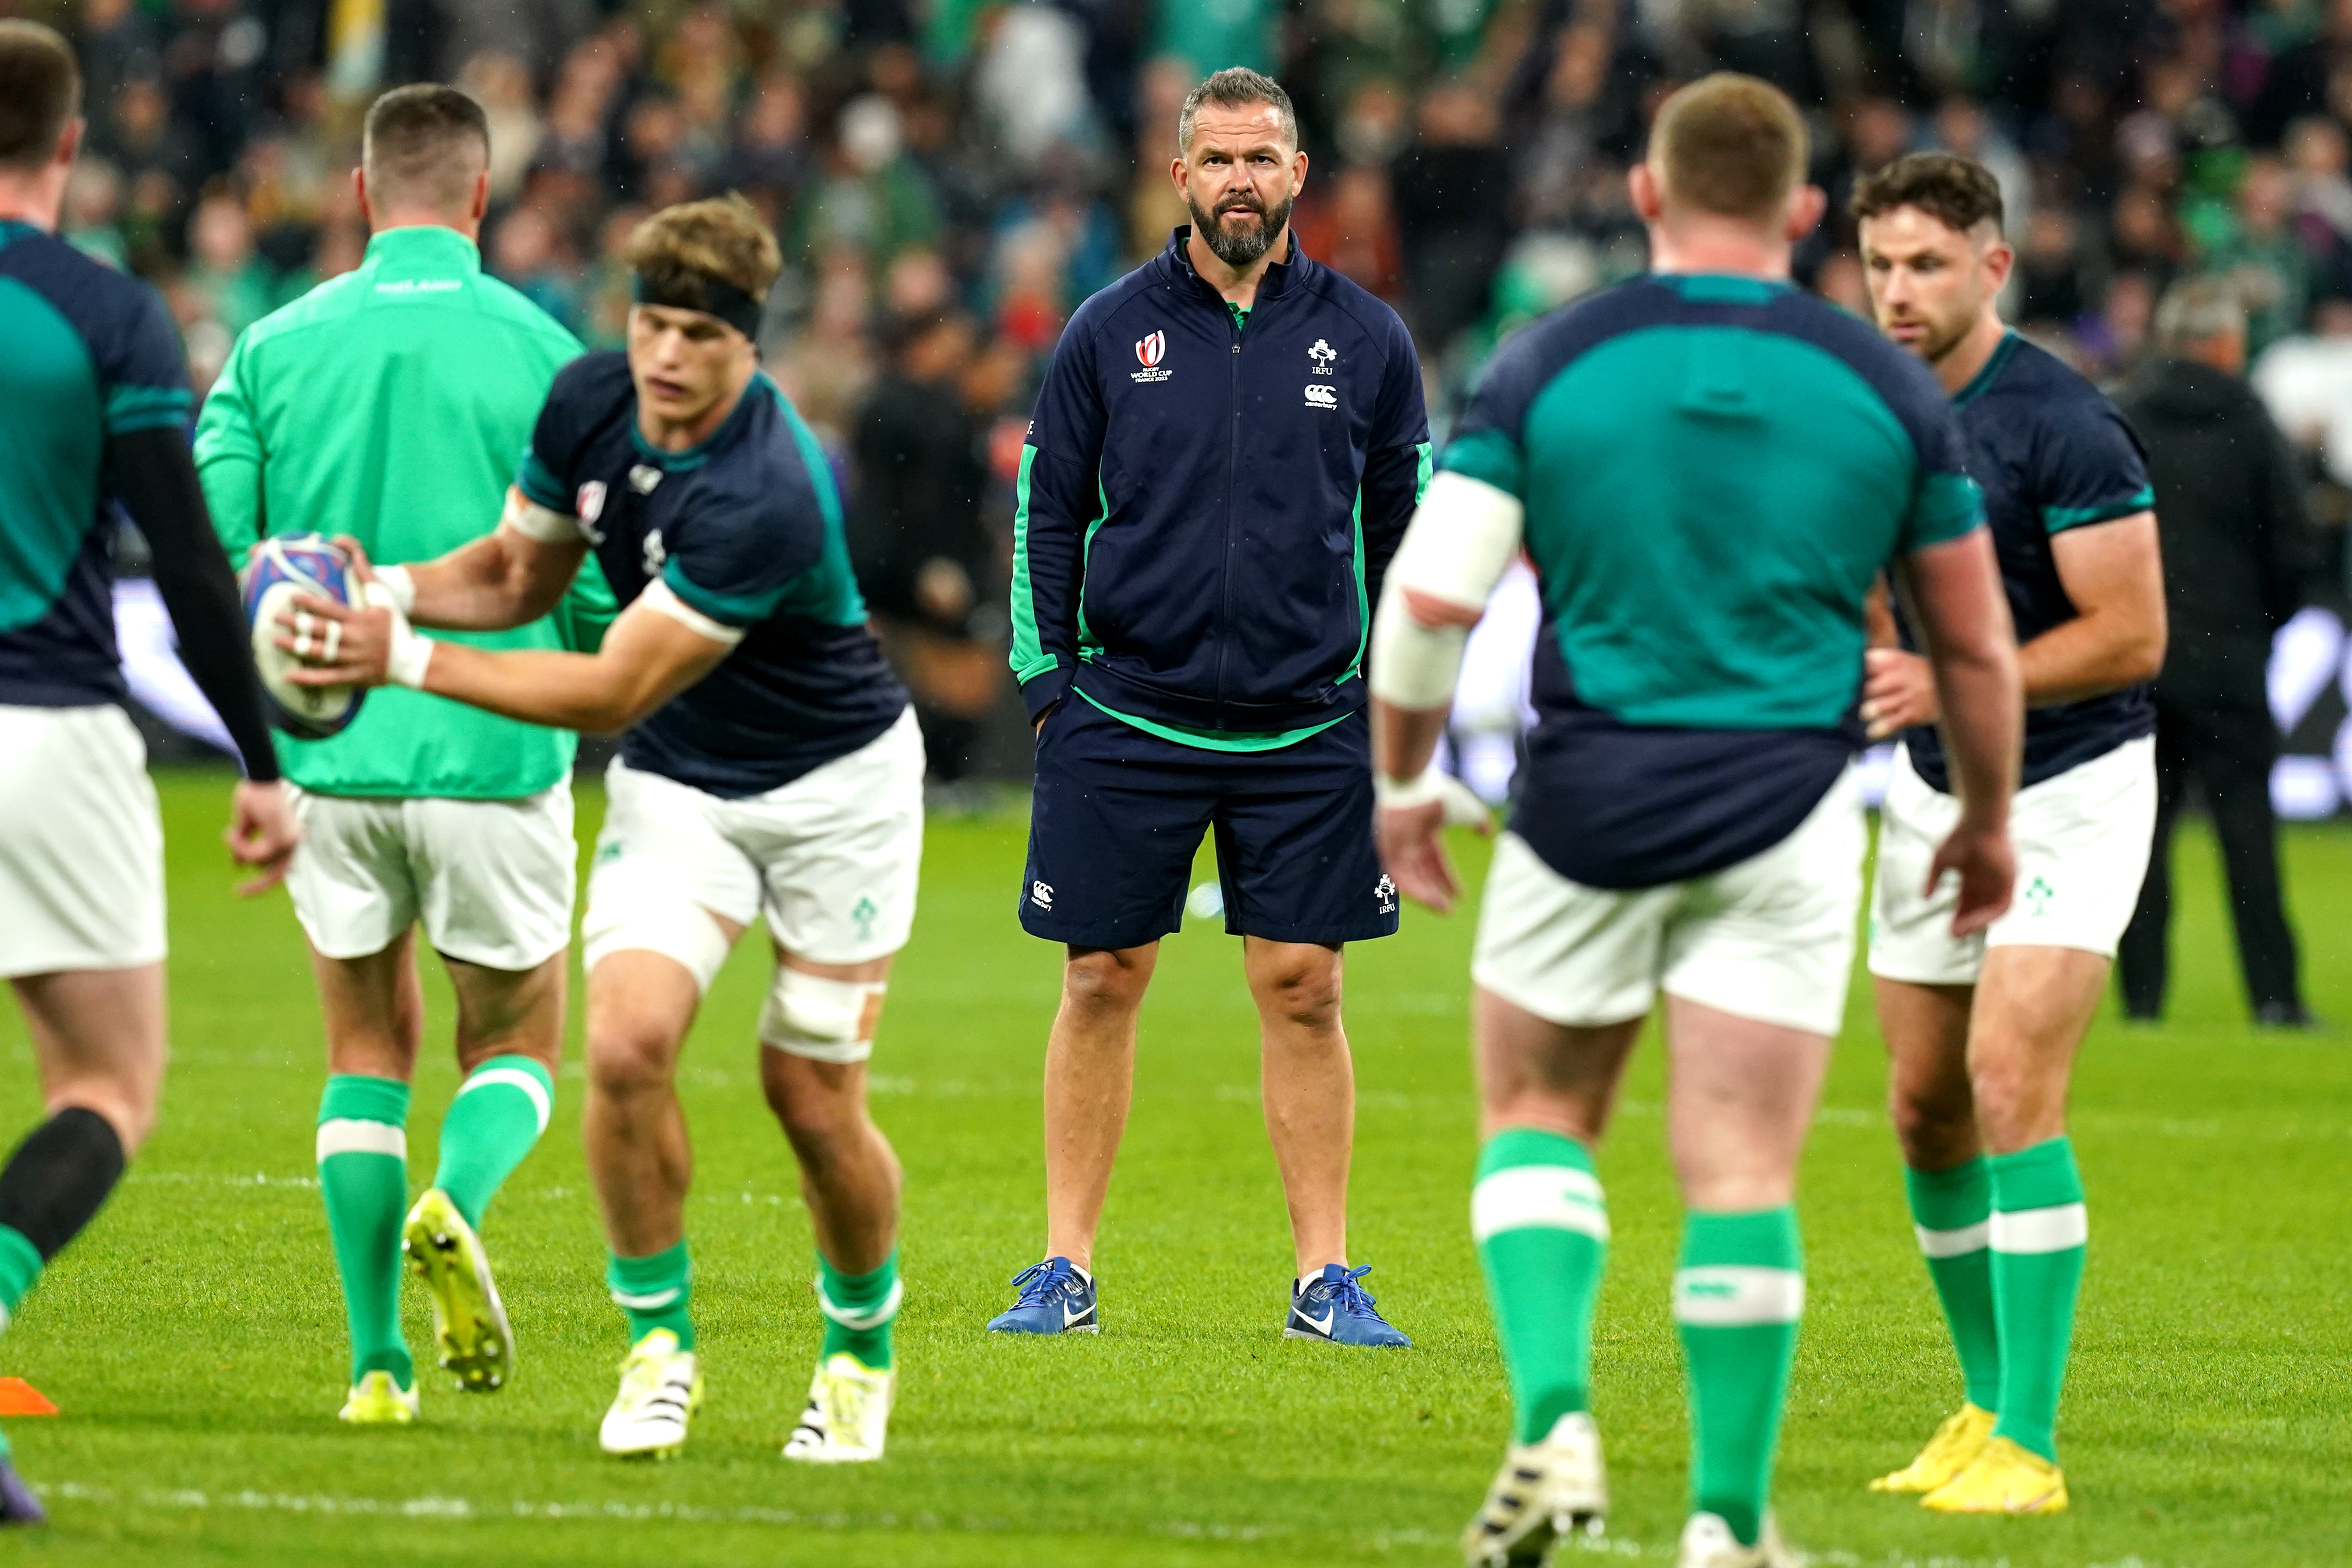 Farrell, centre, has guided Ireland to the top of the world rankings